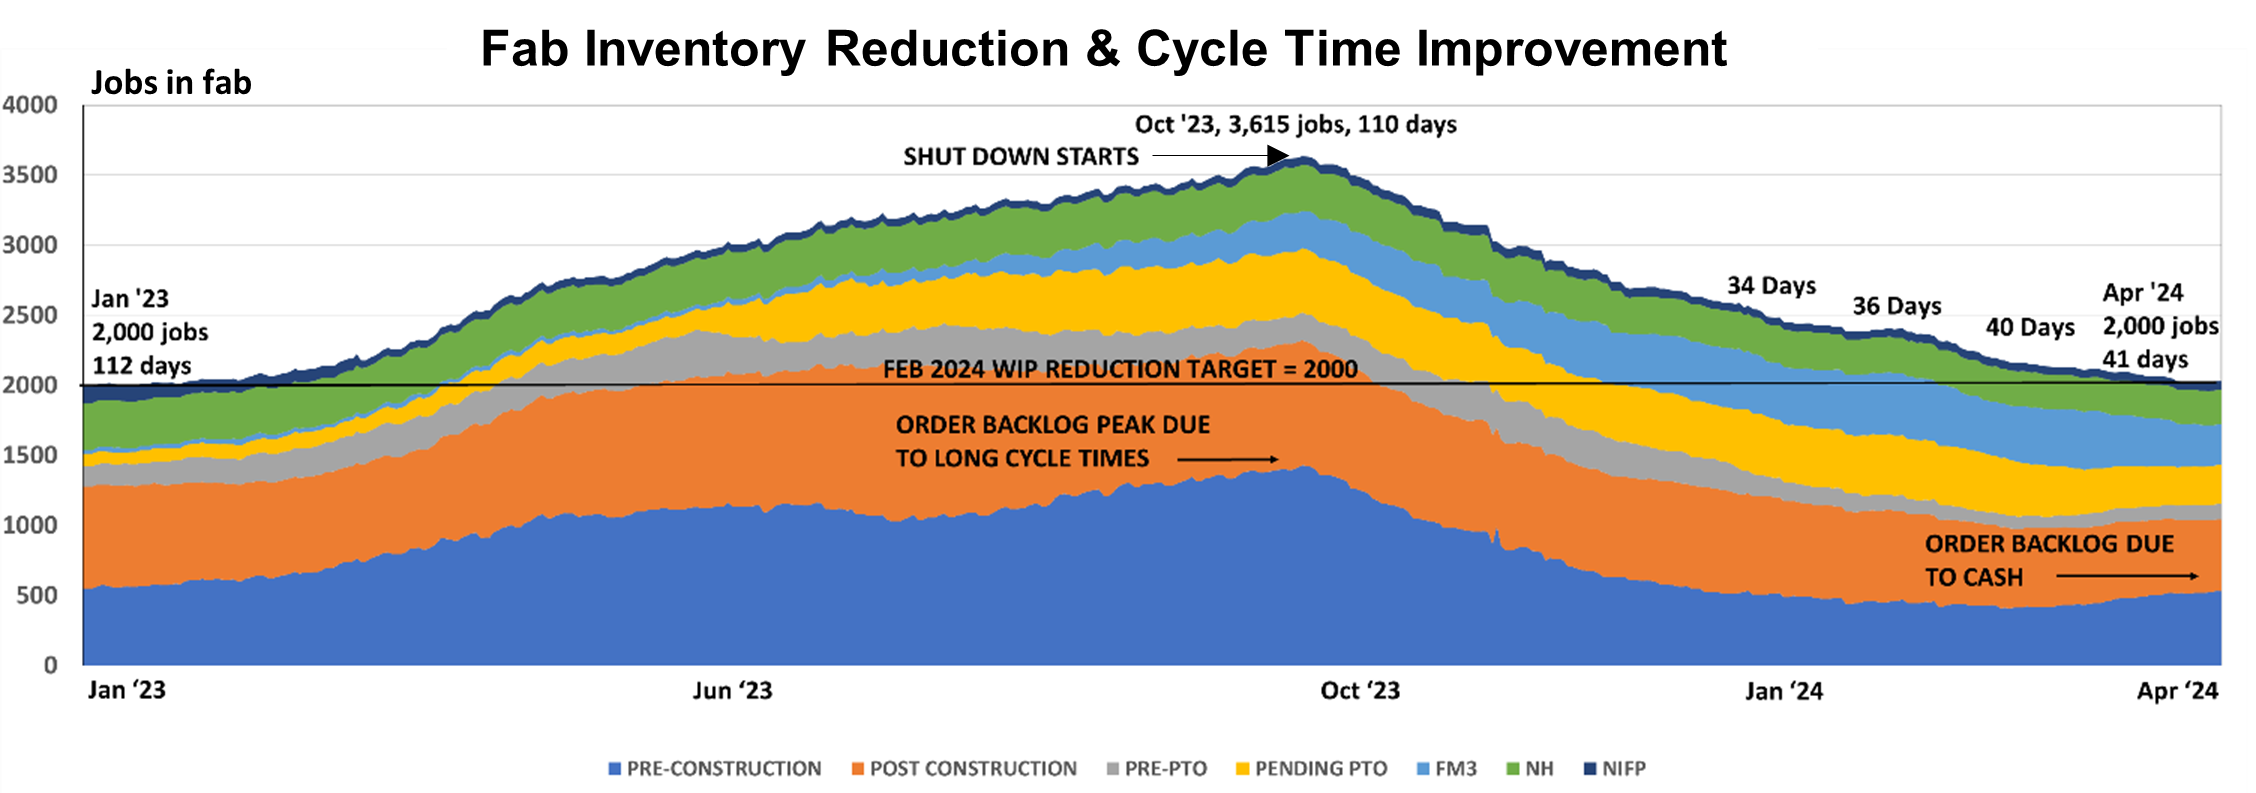 Fab Inventory Reduction & Cycle Time Improvement 